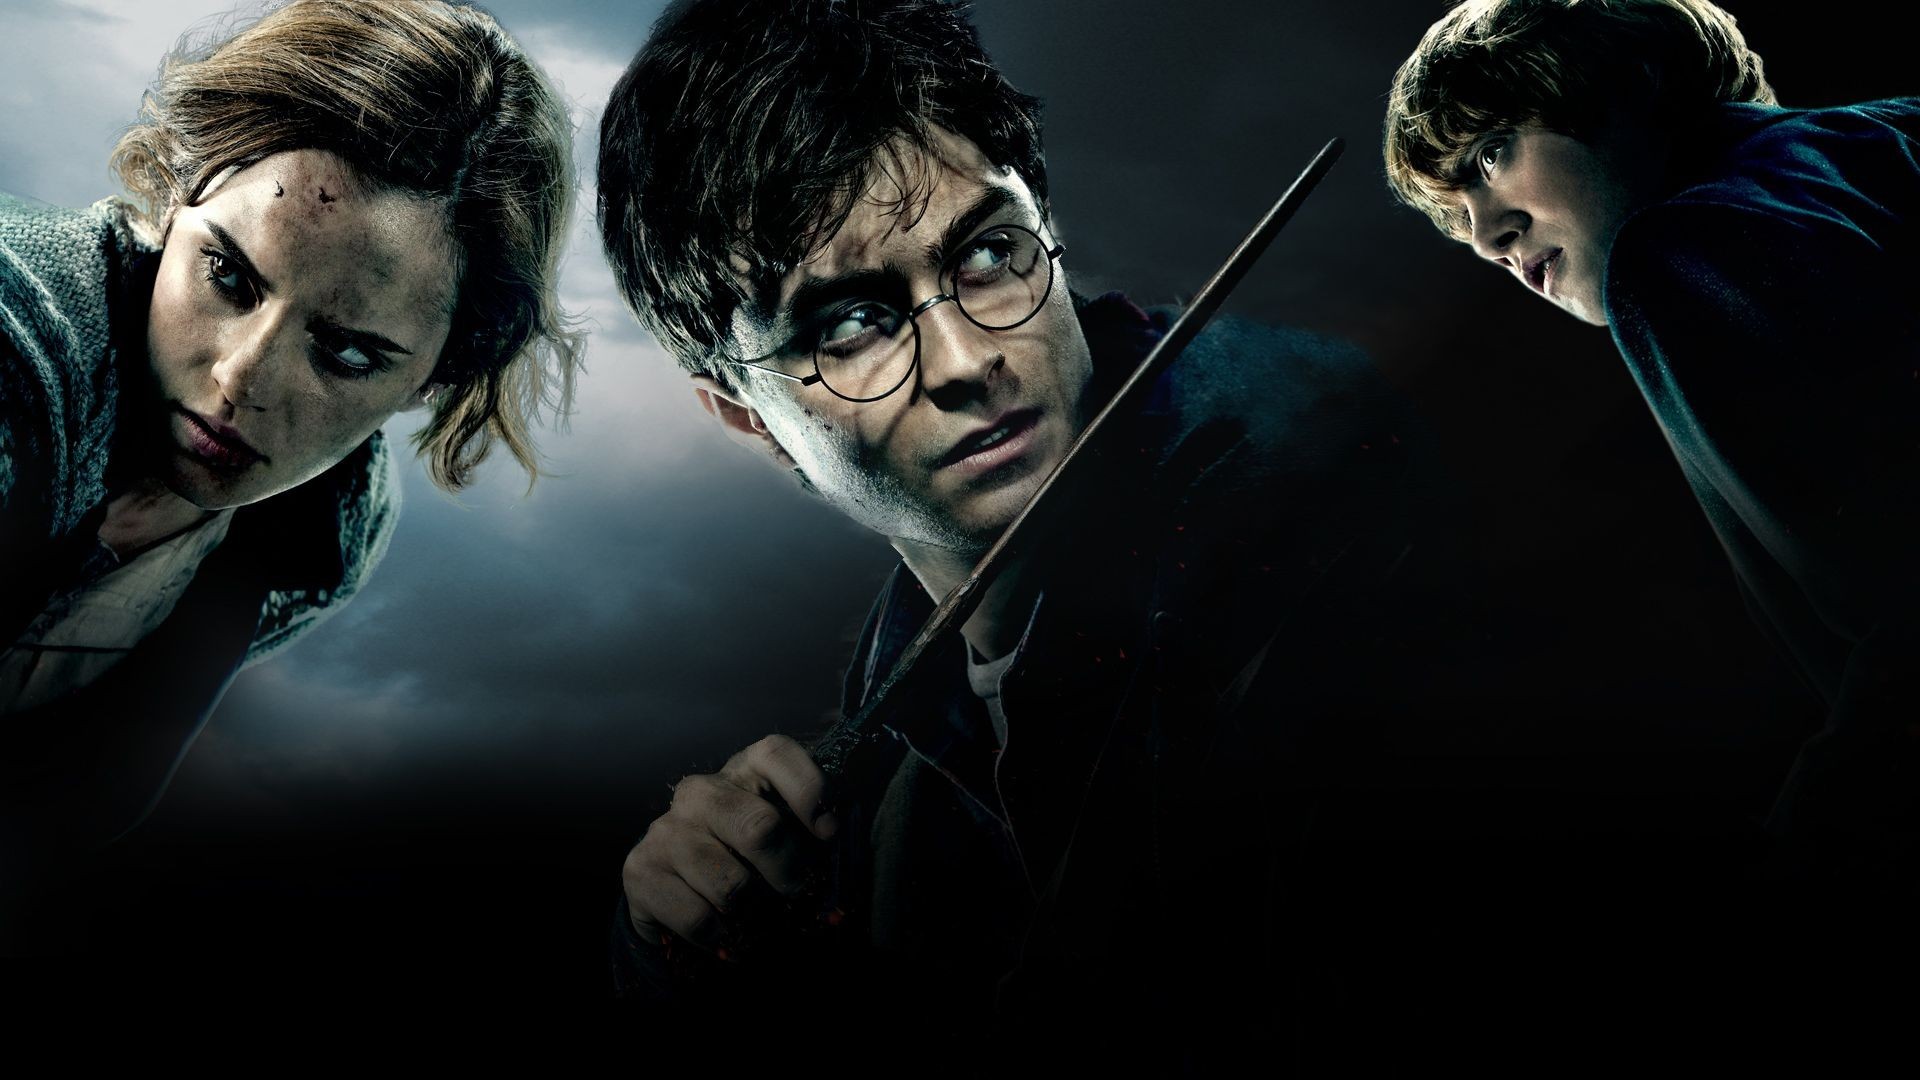 Full HD Wallpaper harry potter, movie, harry potter and the deathly hallows: part 1, daniel radcliffe, emma watson, hermione granger, ron weasley, rupert grint